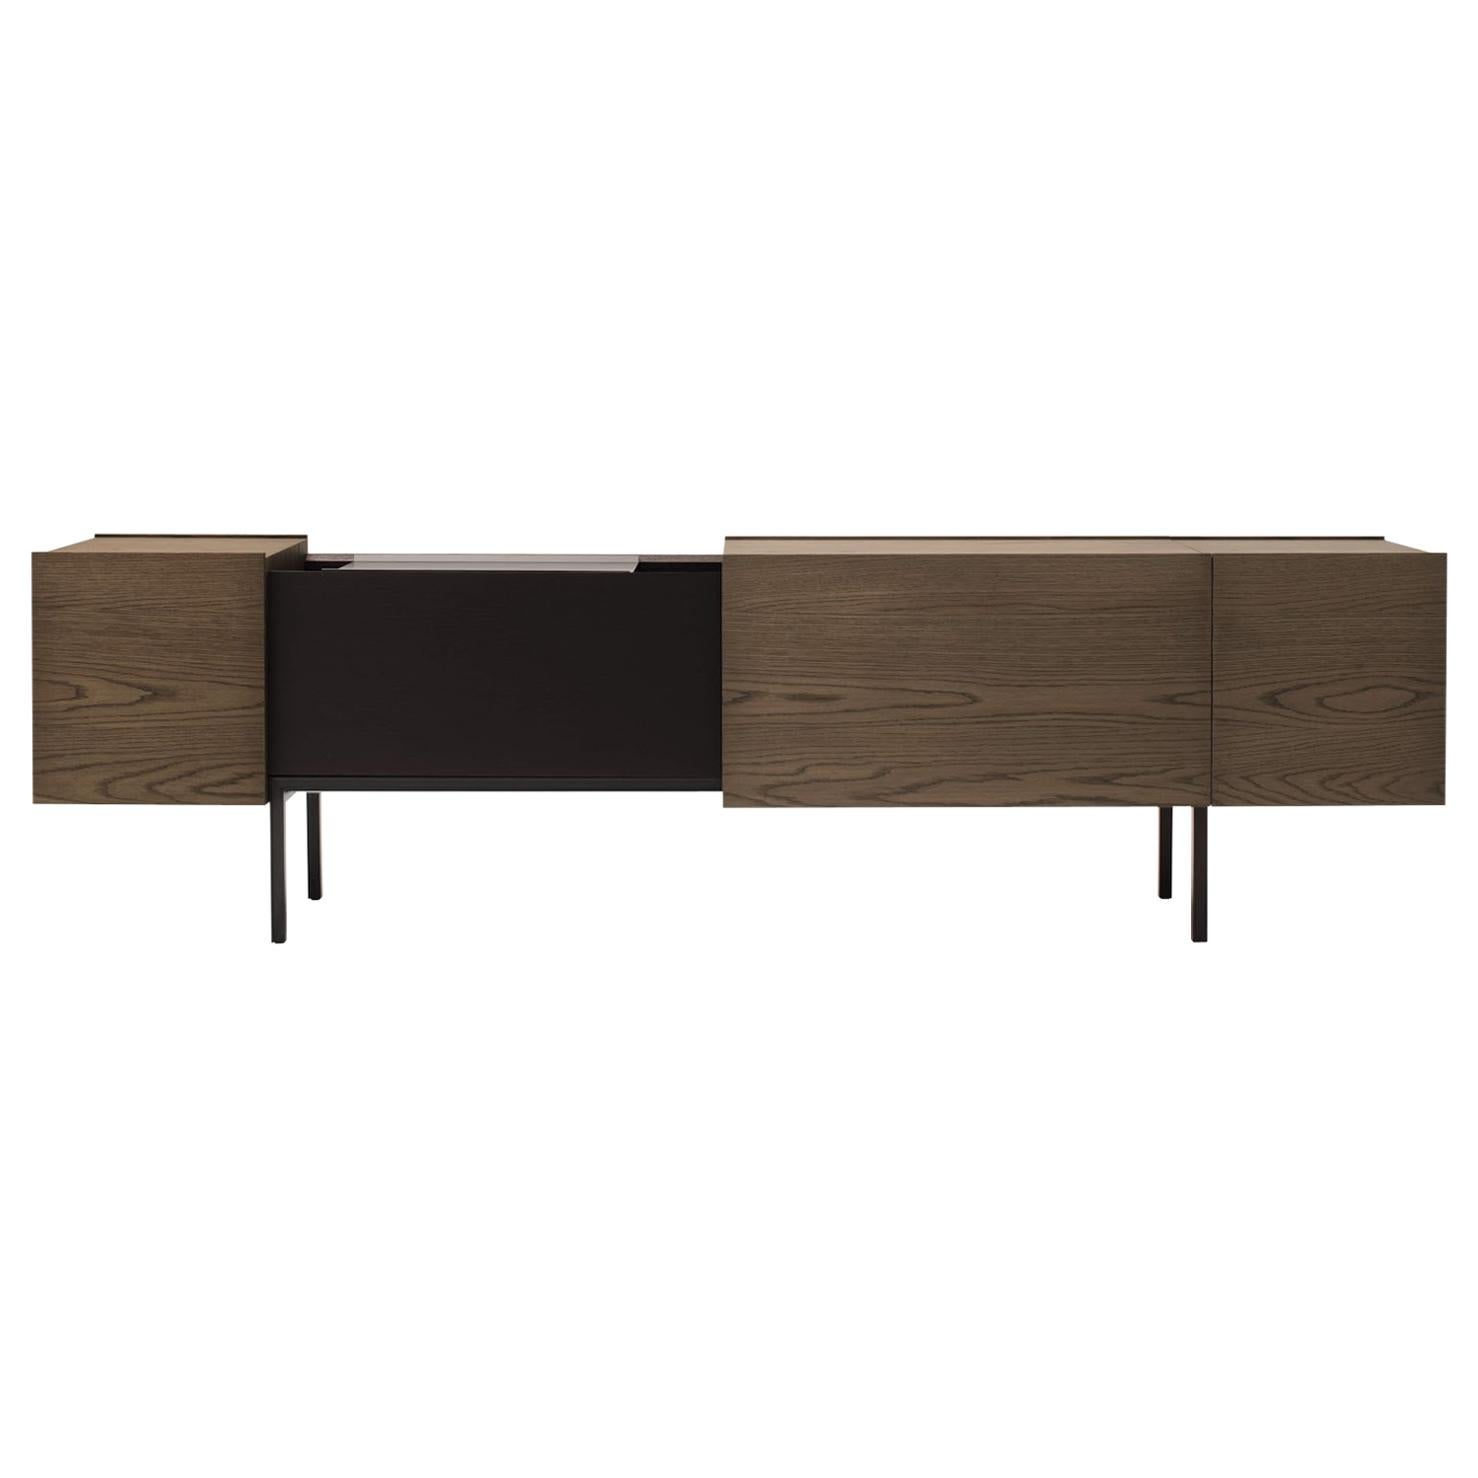 Ladin Sideboard in Wood Veneer with Lacquered Base by Busnelli im Angebot